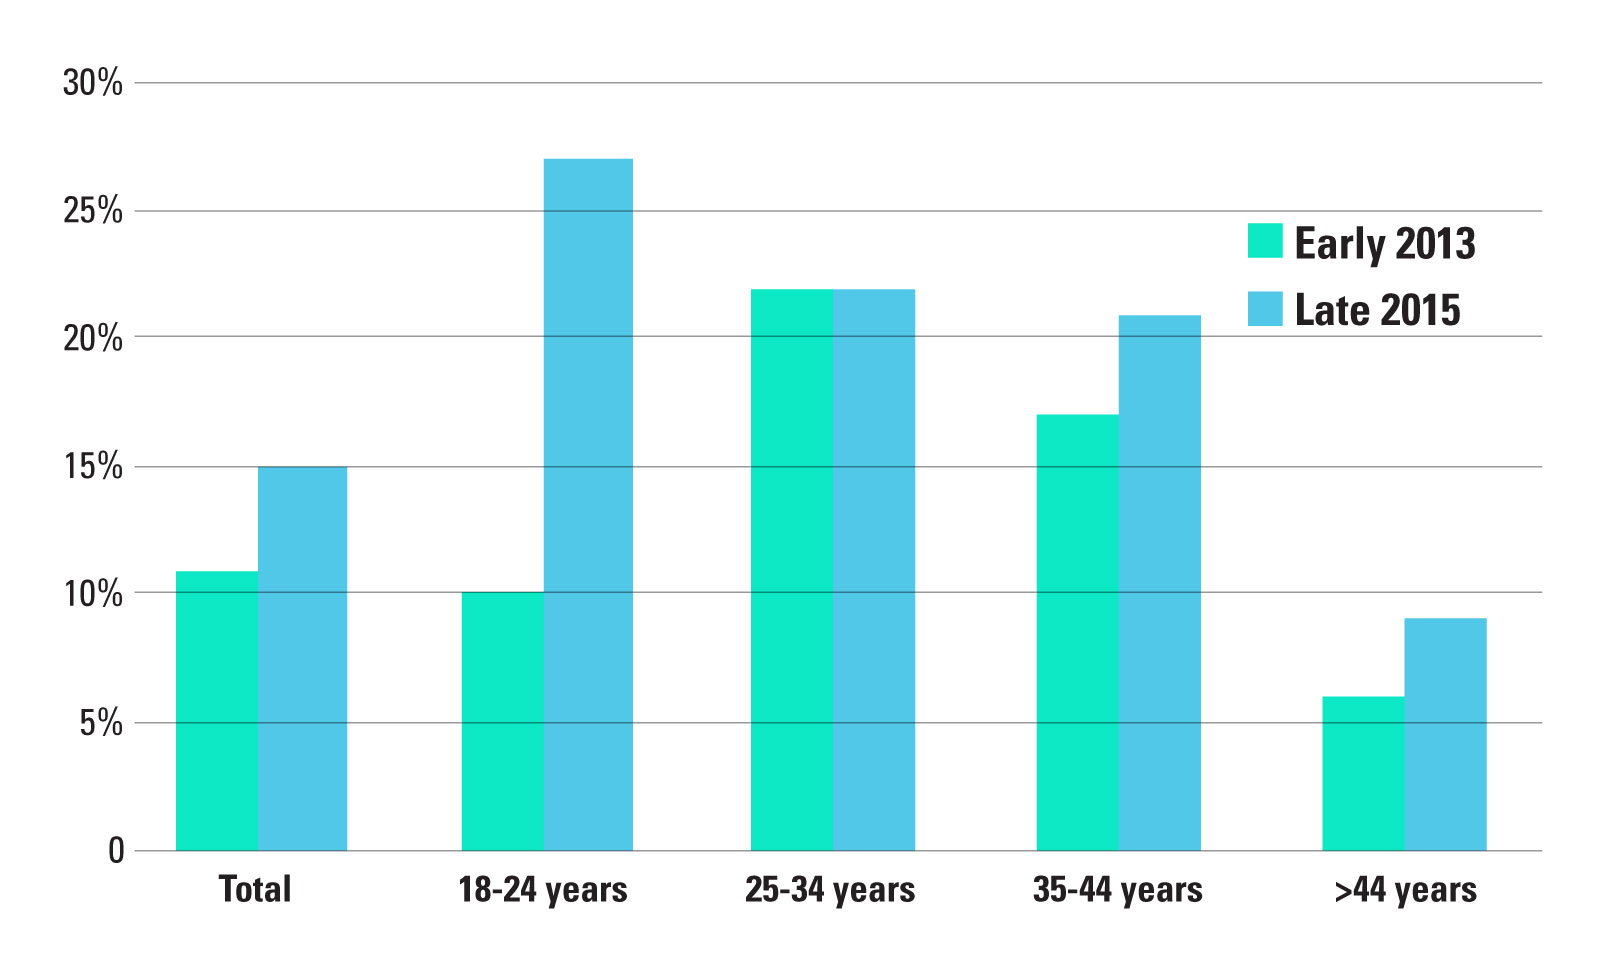 Percentage of Online Dating App Users by Age Group